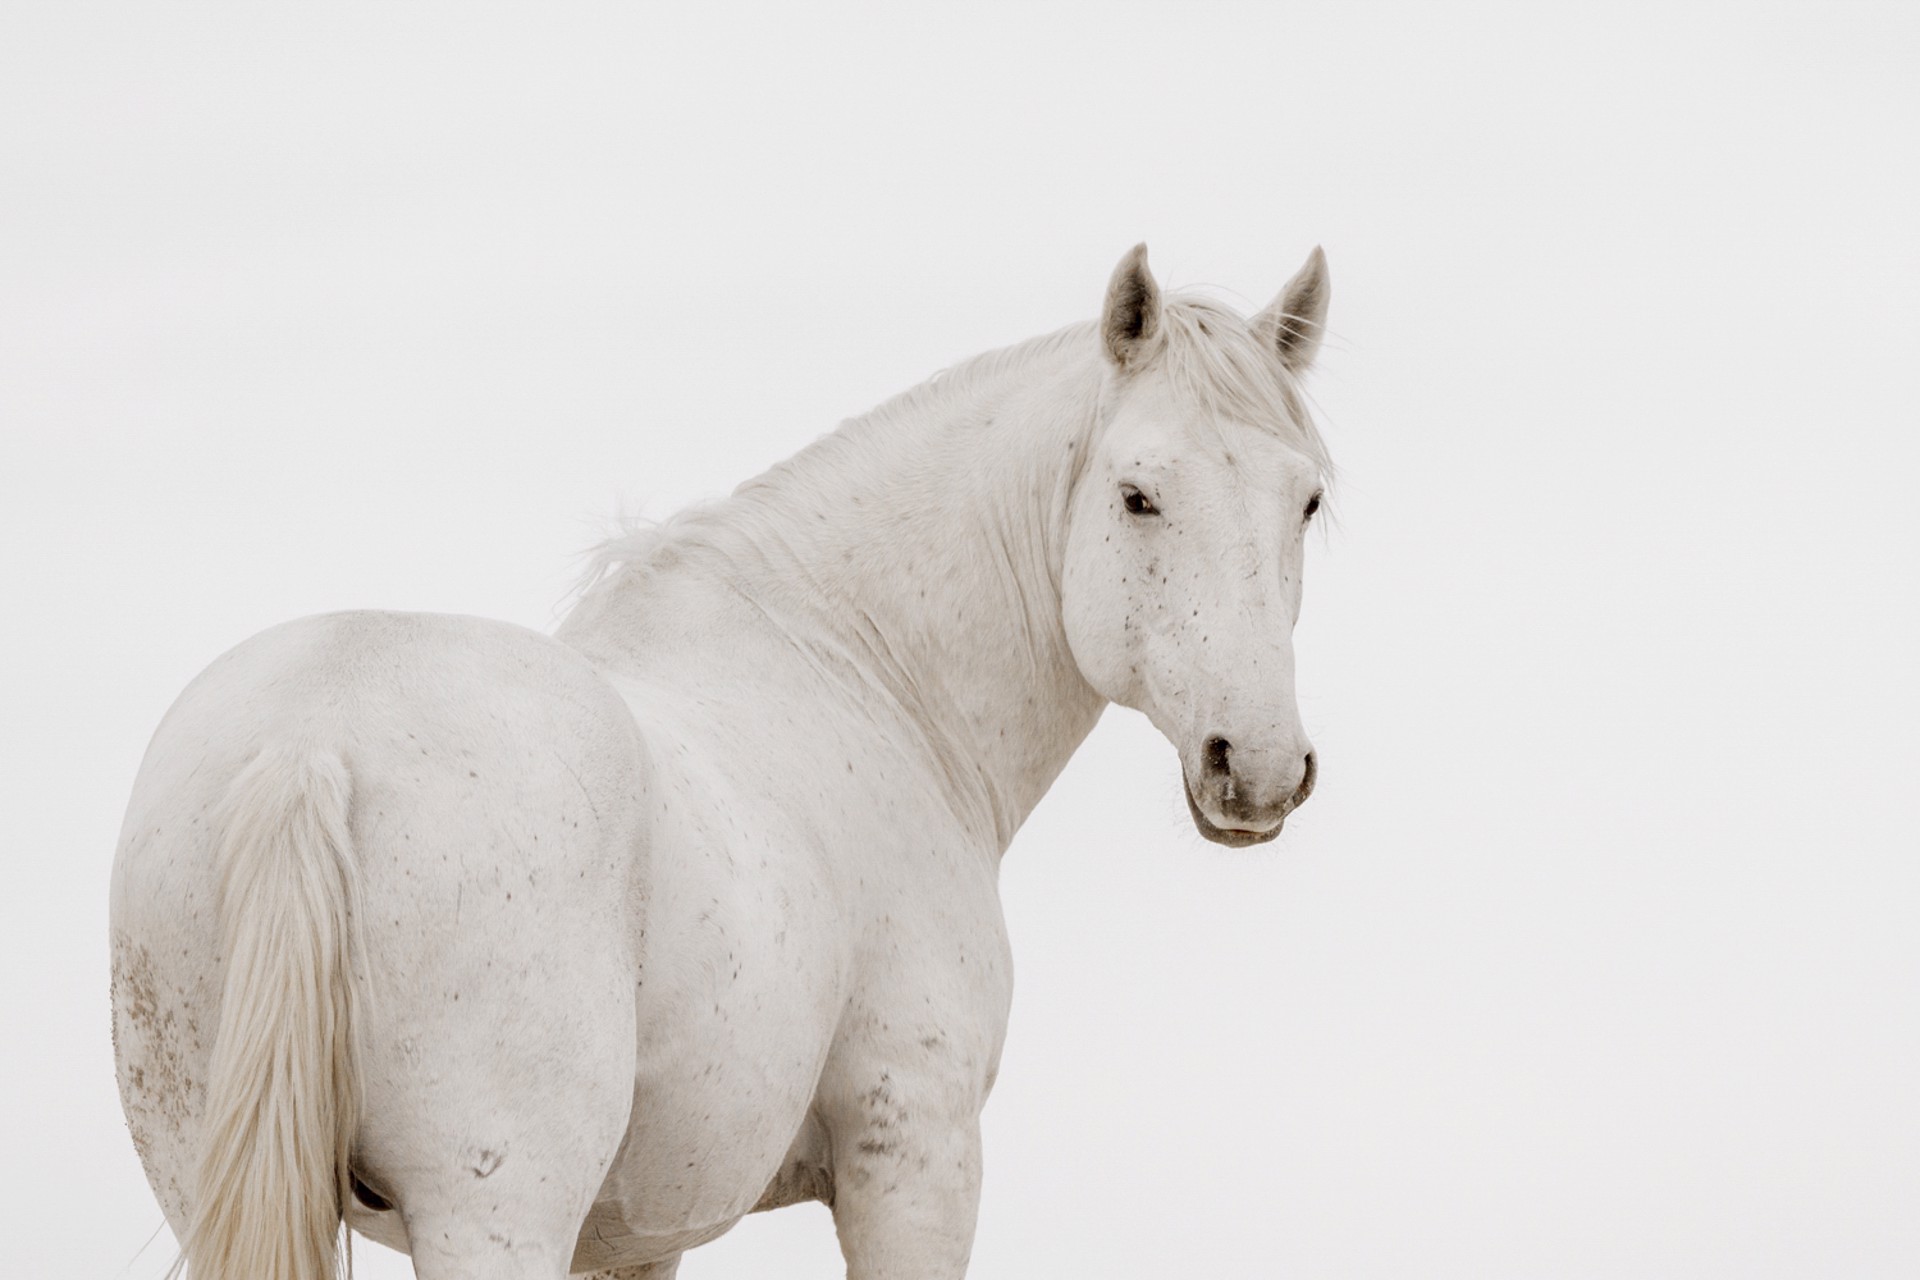 Photograph Featuring White Wild Horse Looking Back At Camera In Sepia Tone Black And White